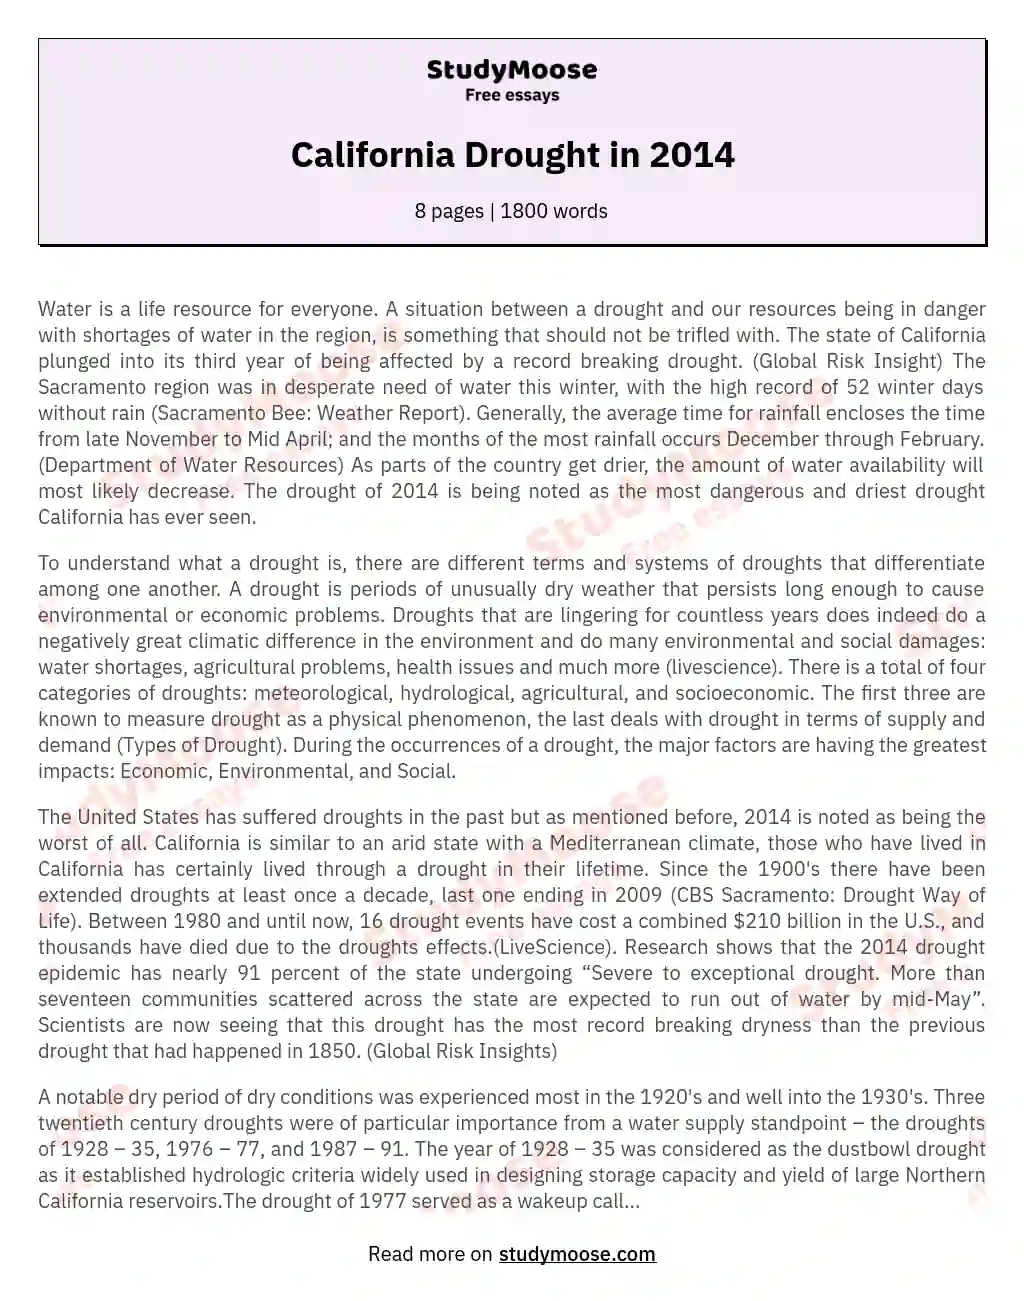 The Ongoing Drought Crisis in California essay